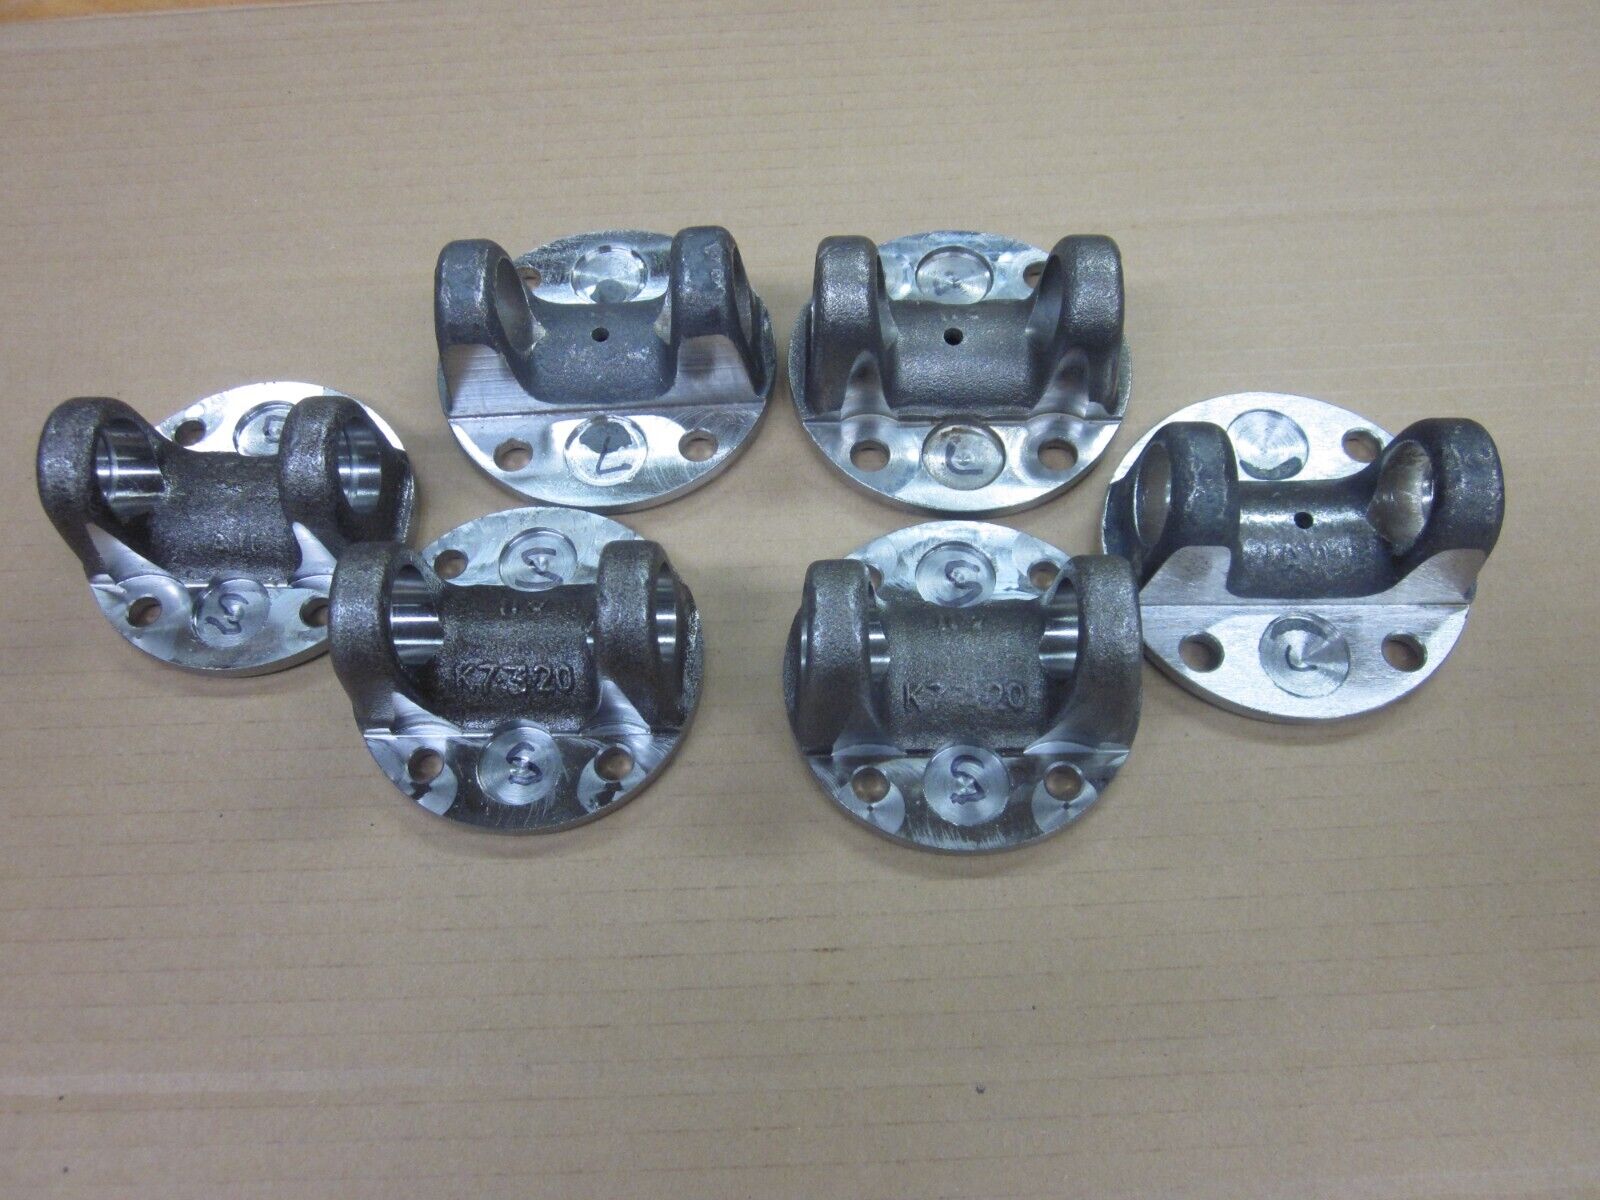 Triumph Spitfire Axle flange 71 to 80 and GT6 MK2 and MK3